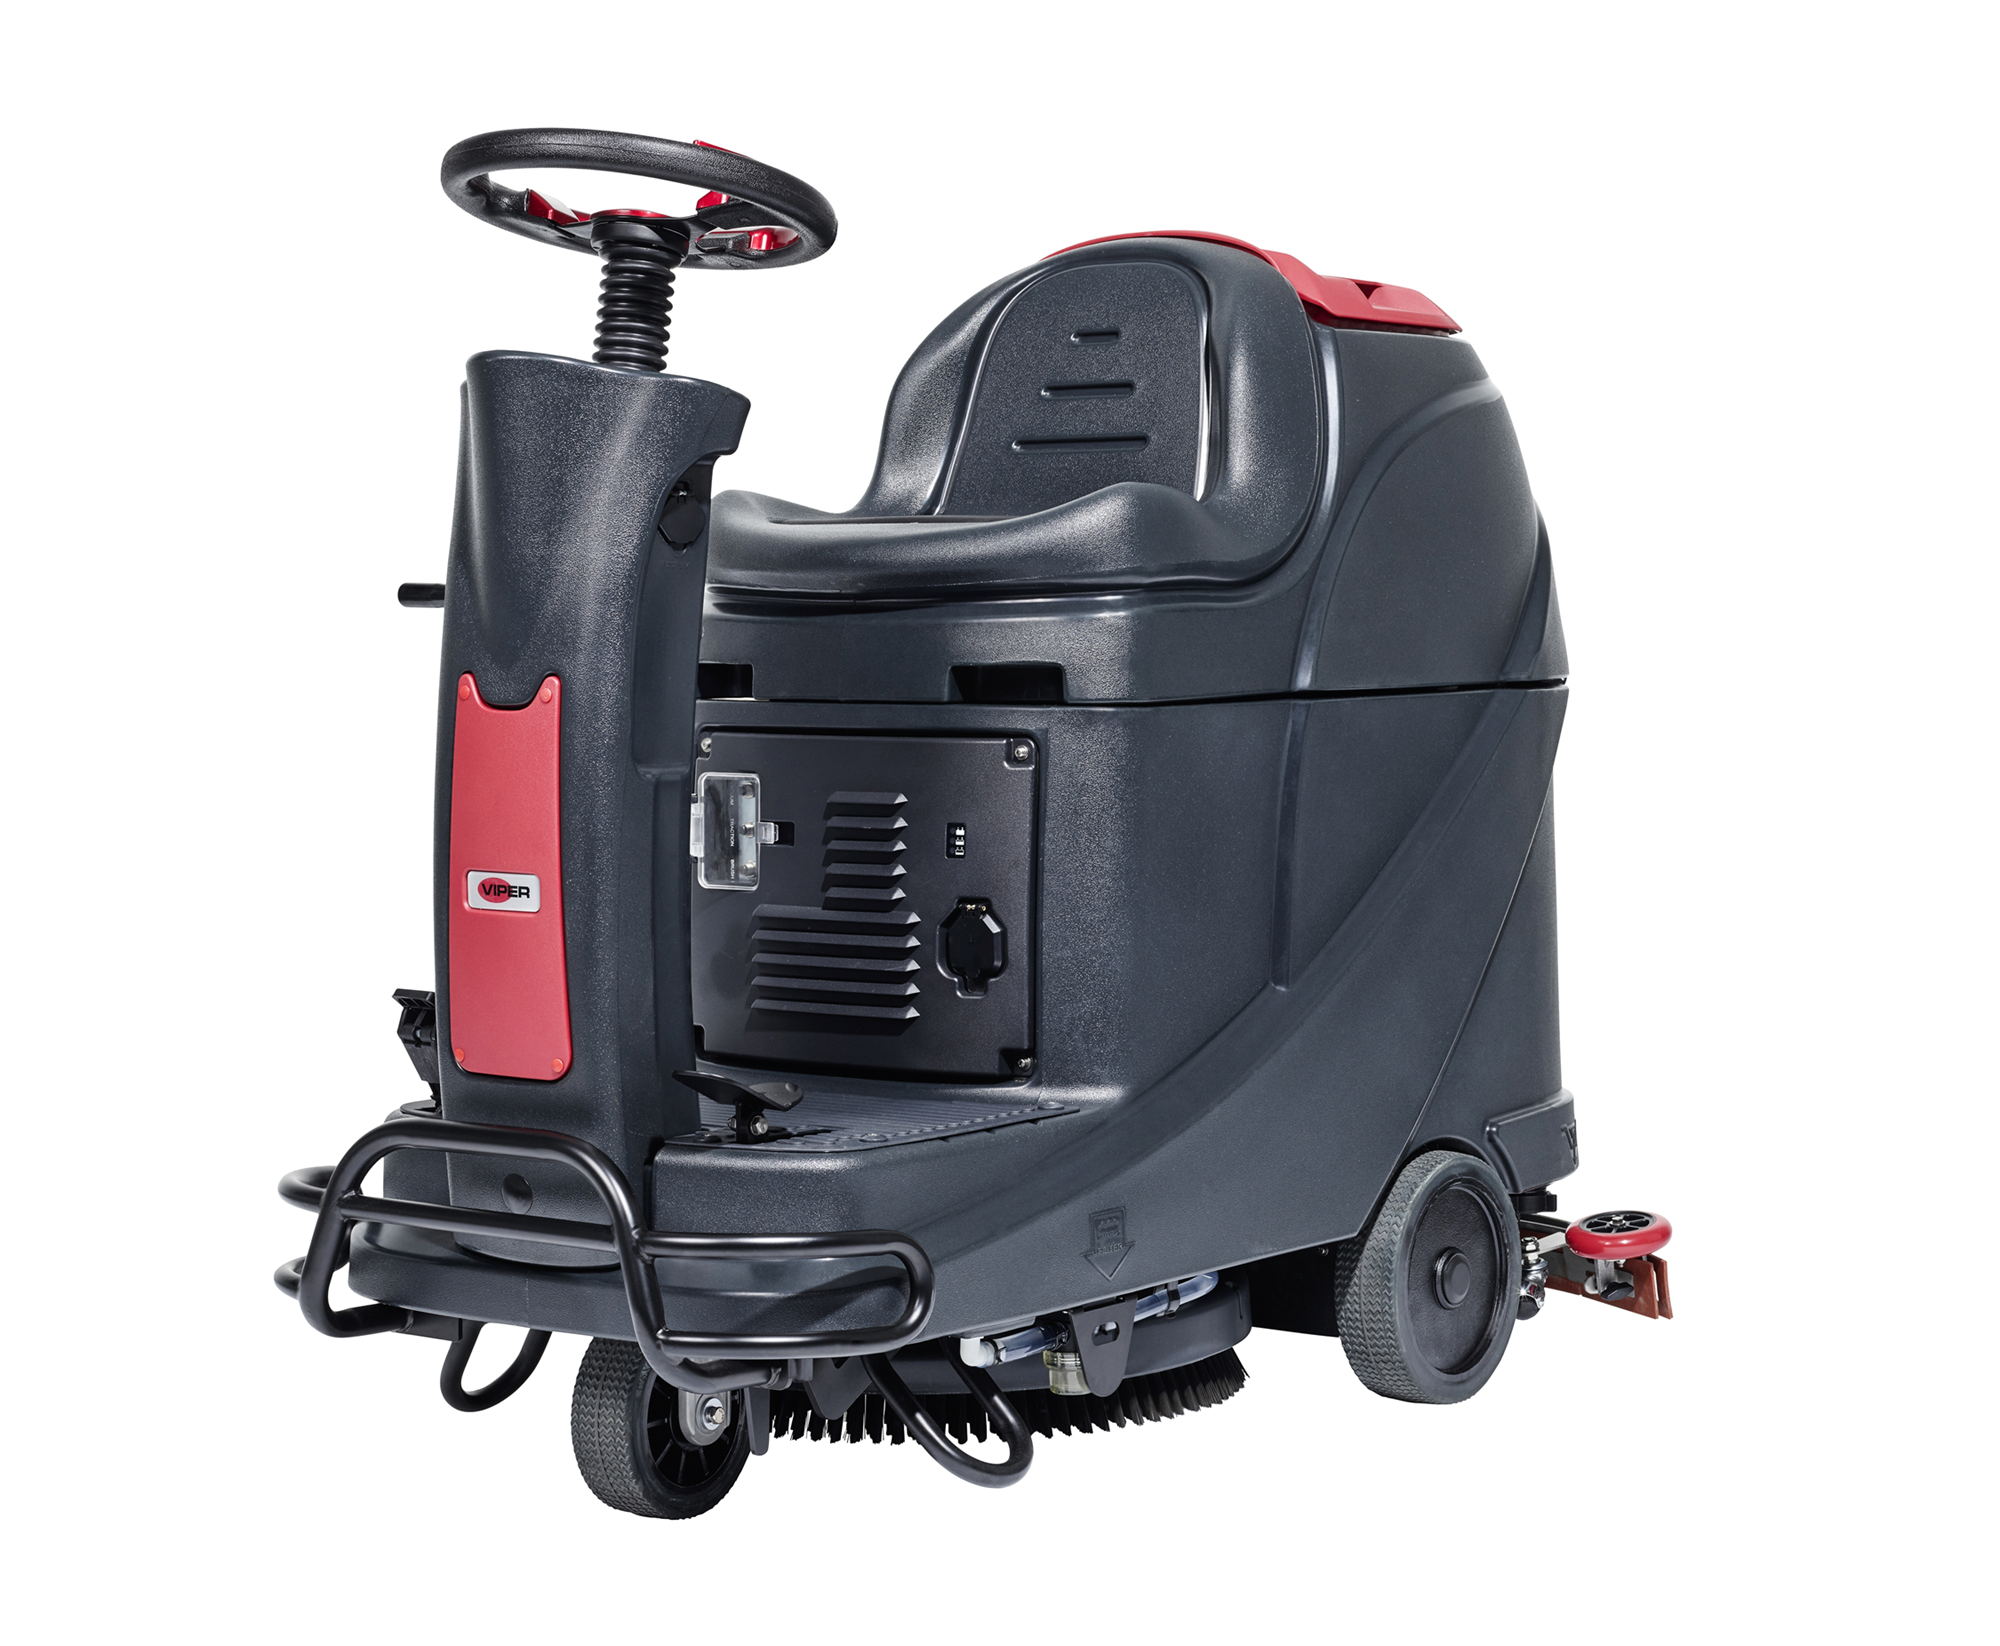 Viper AS530R Ride-On Scrubber Dryer